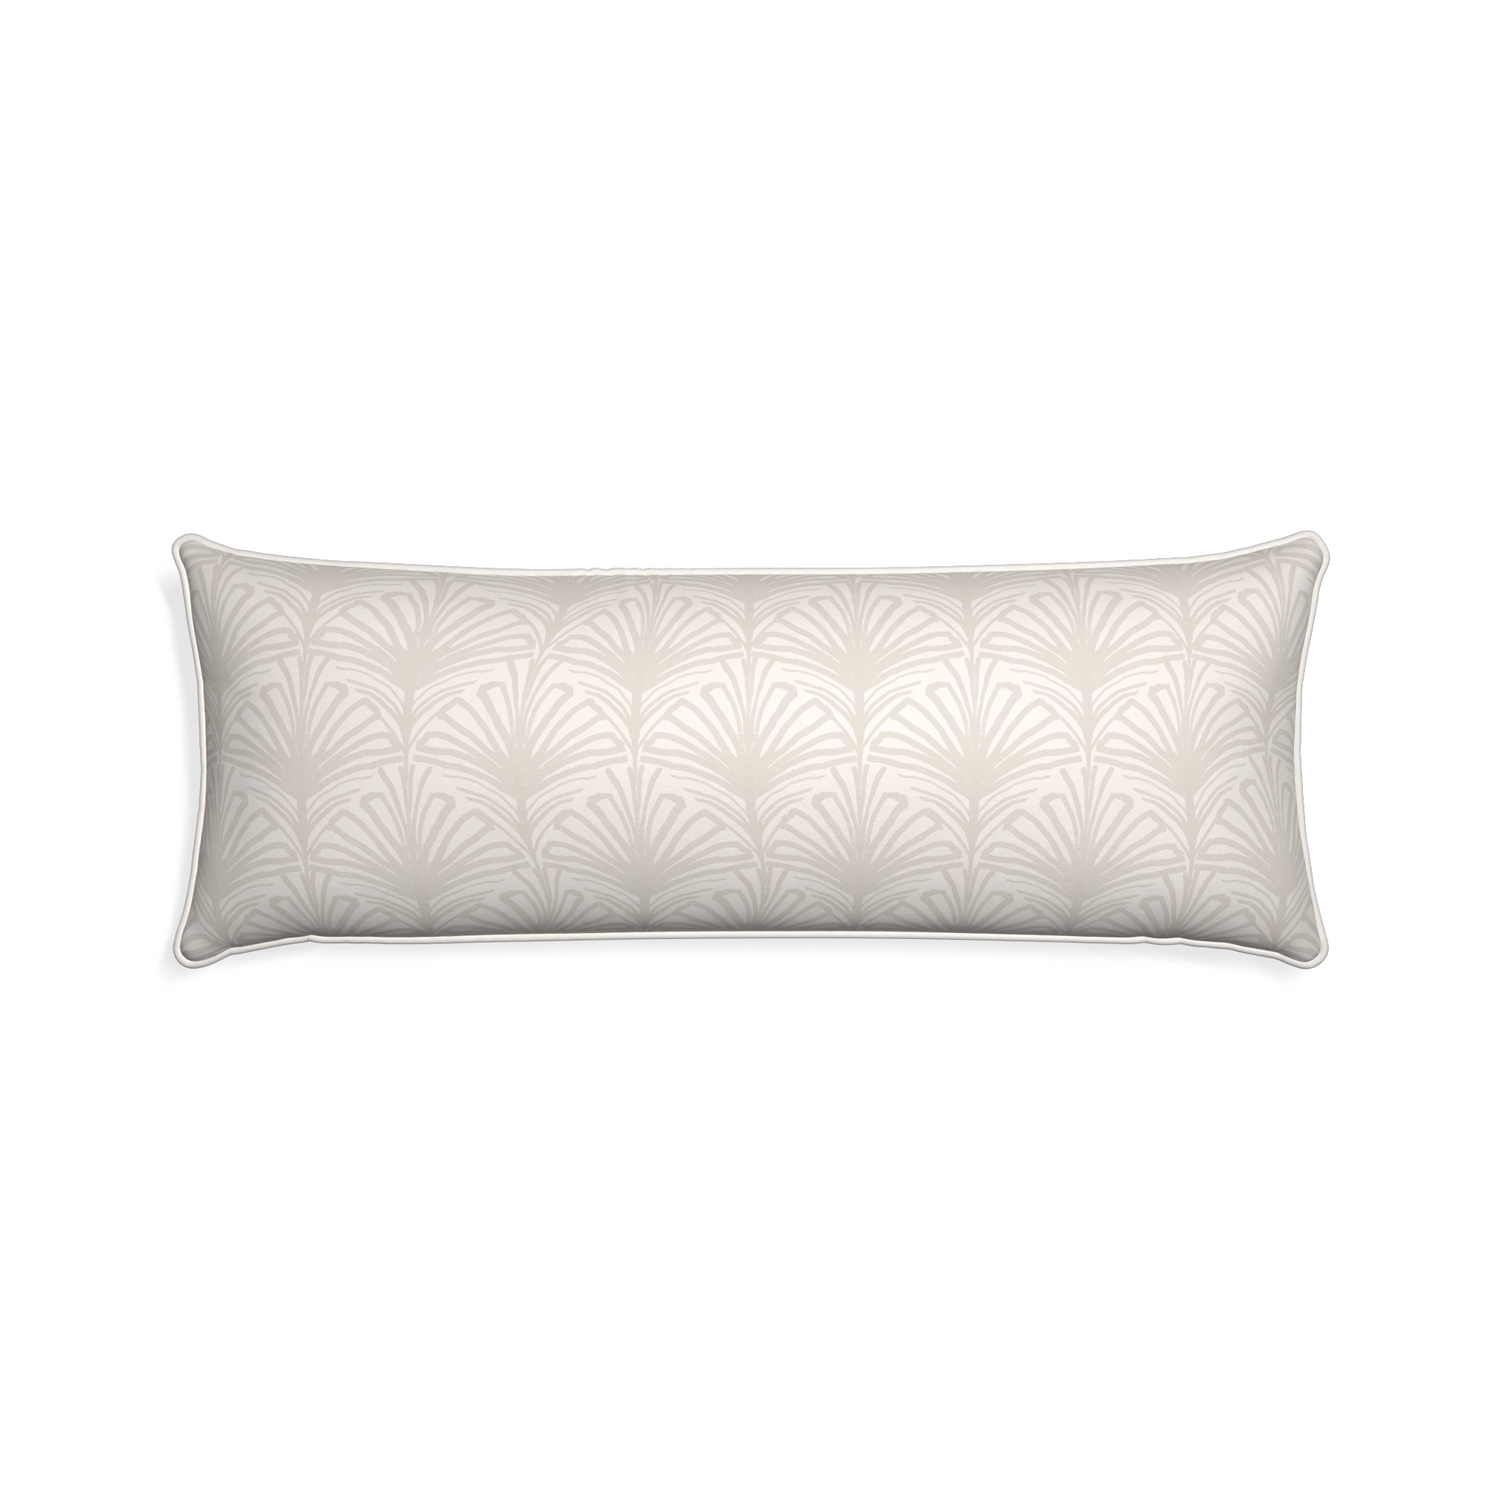 Xl-lumbar suzy sand custom pillow with snow piping on white background